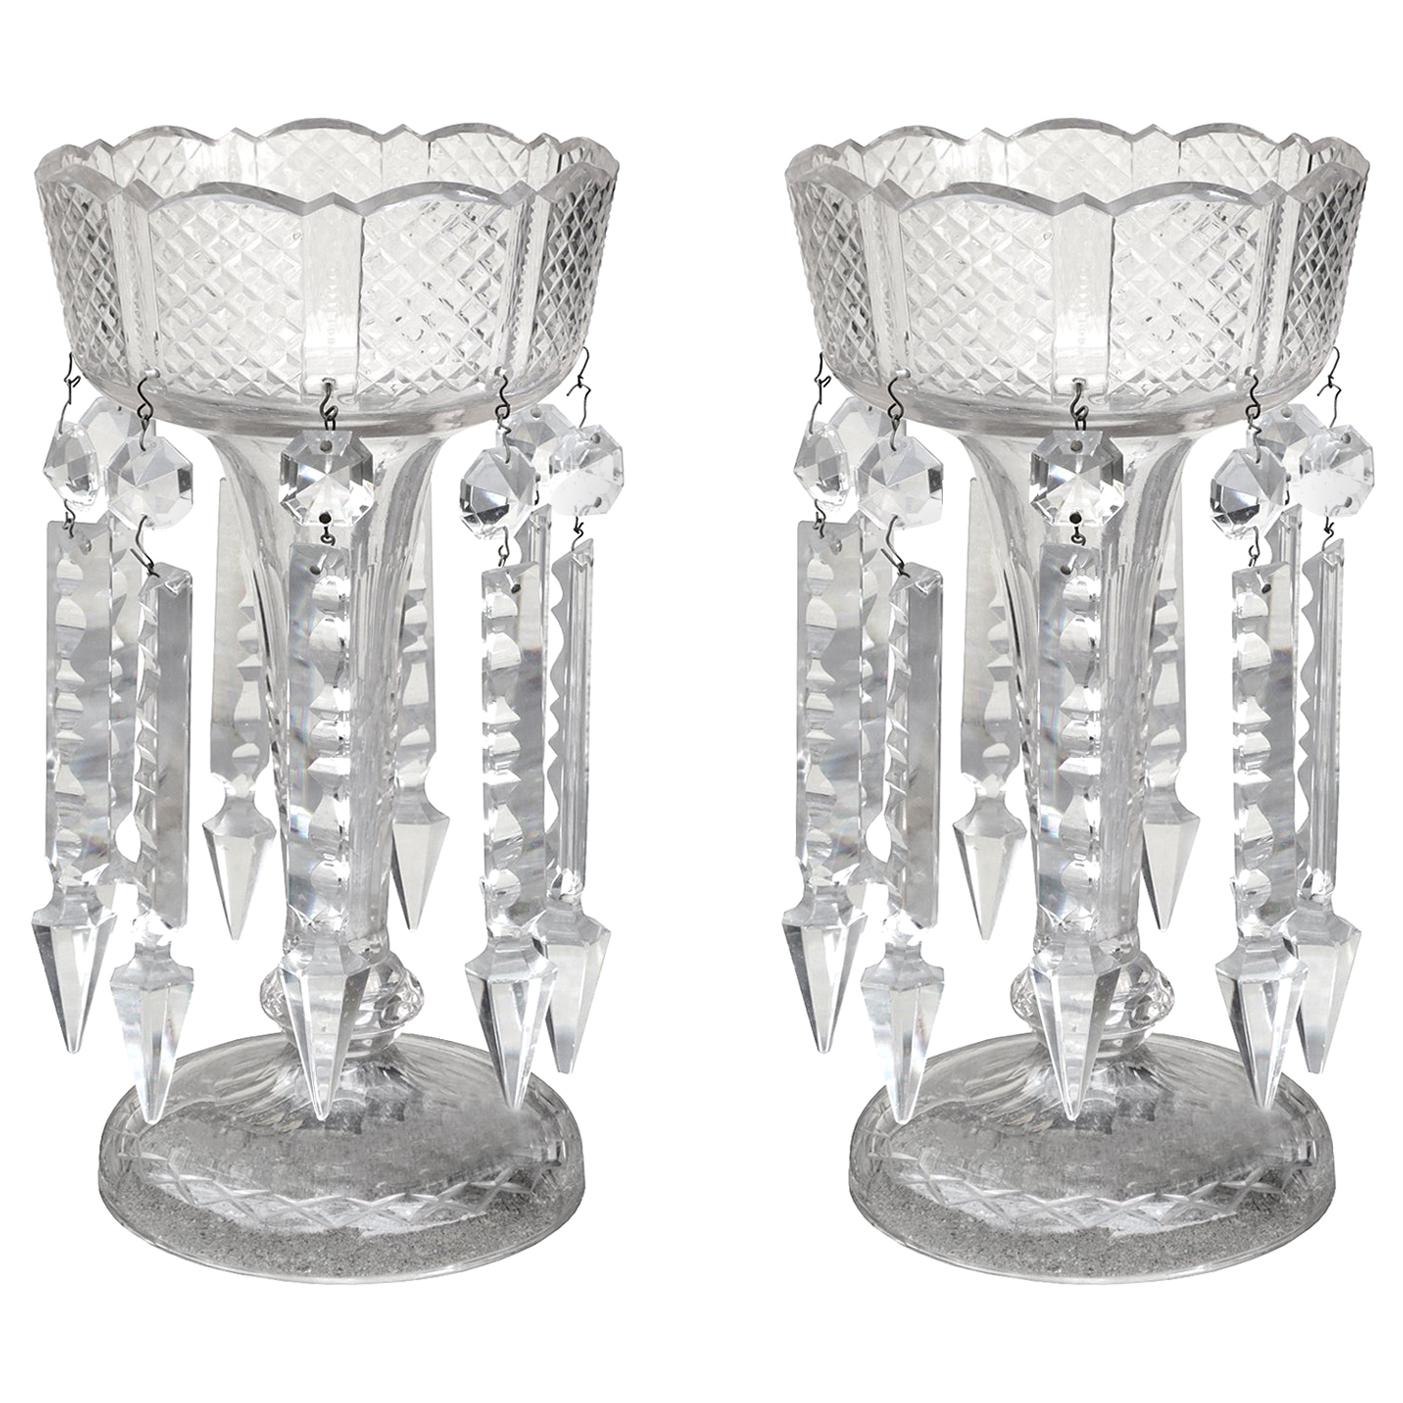 Pair of 19th Century American Clear Cut Crystal Mantel Lusters with Prisms